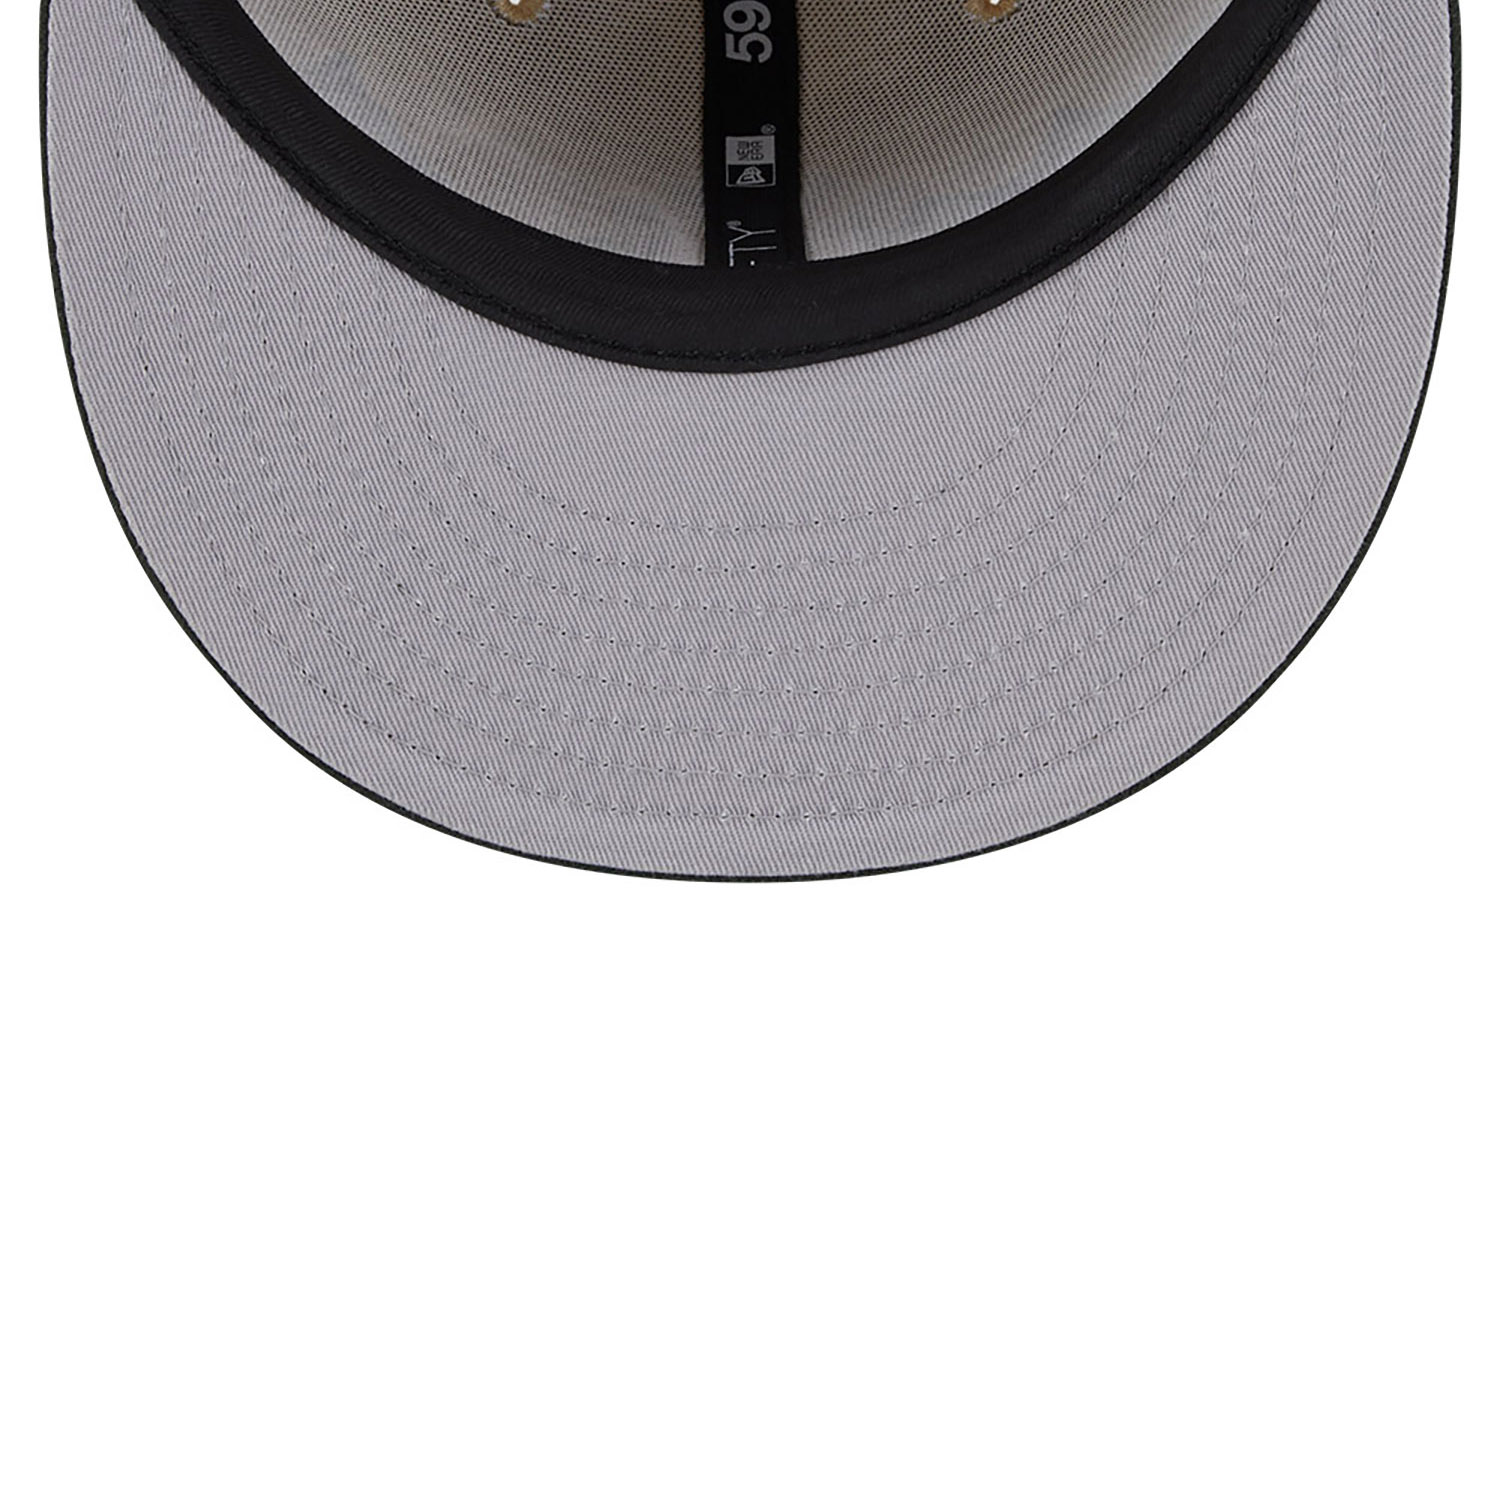 New York Yankees Team Landscape Light Beige 59FIFTY Fitted Cap